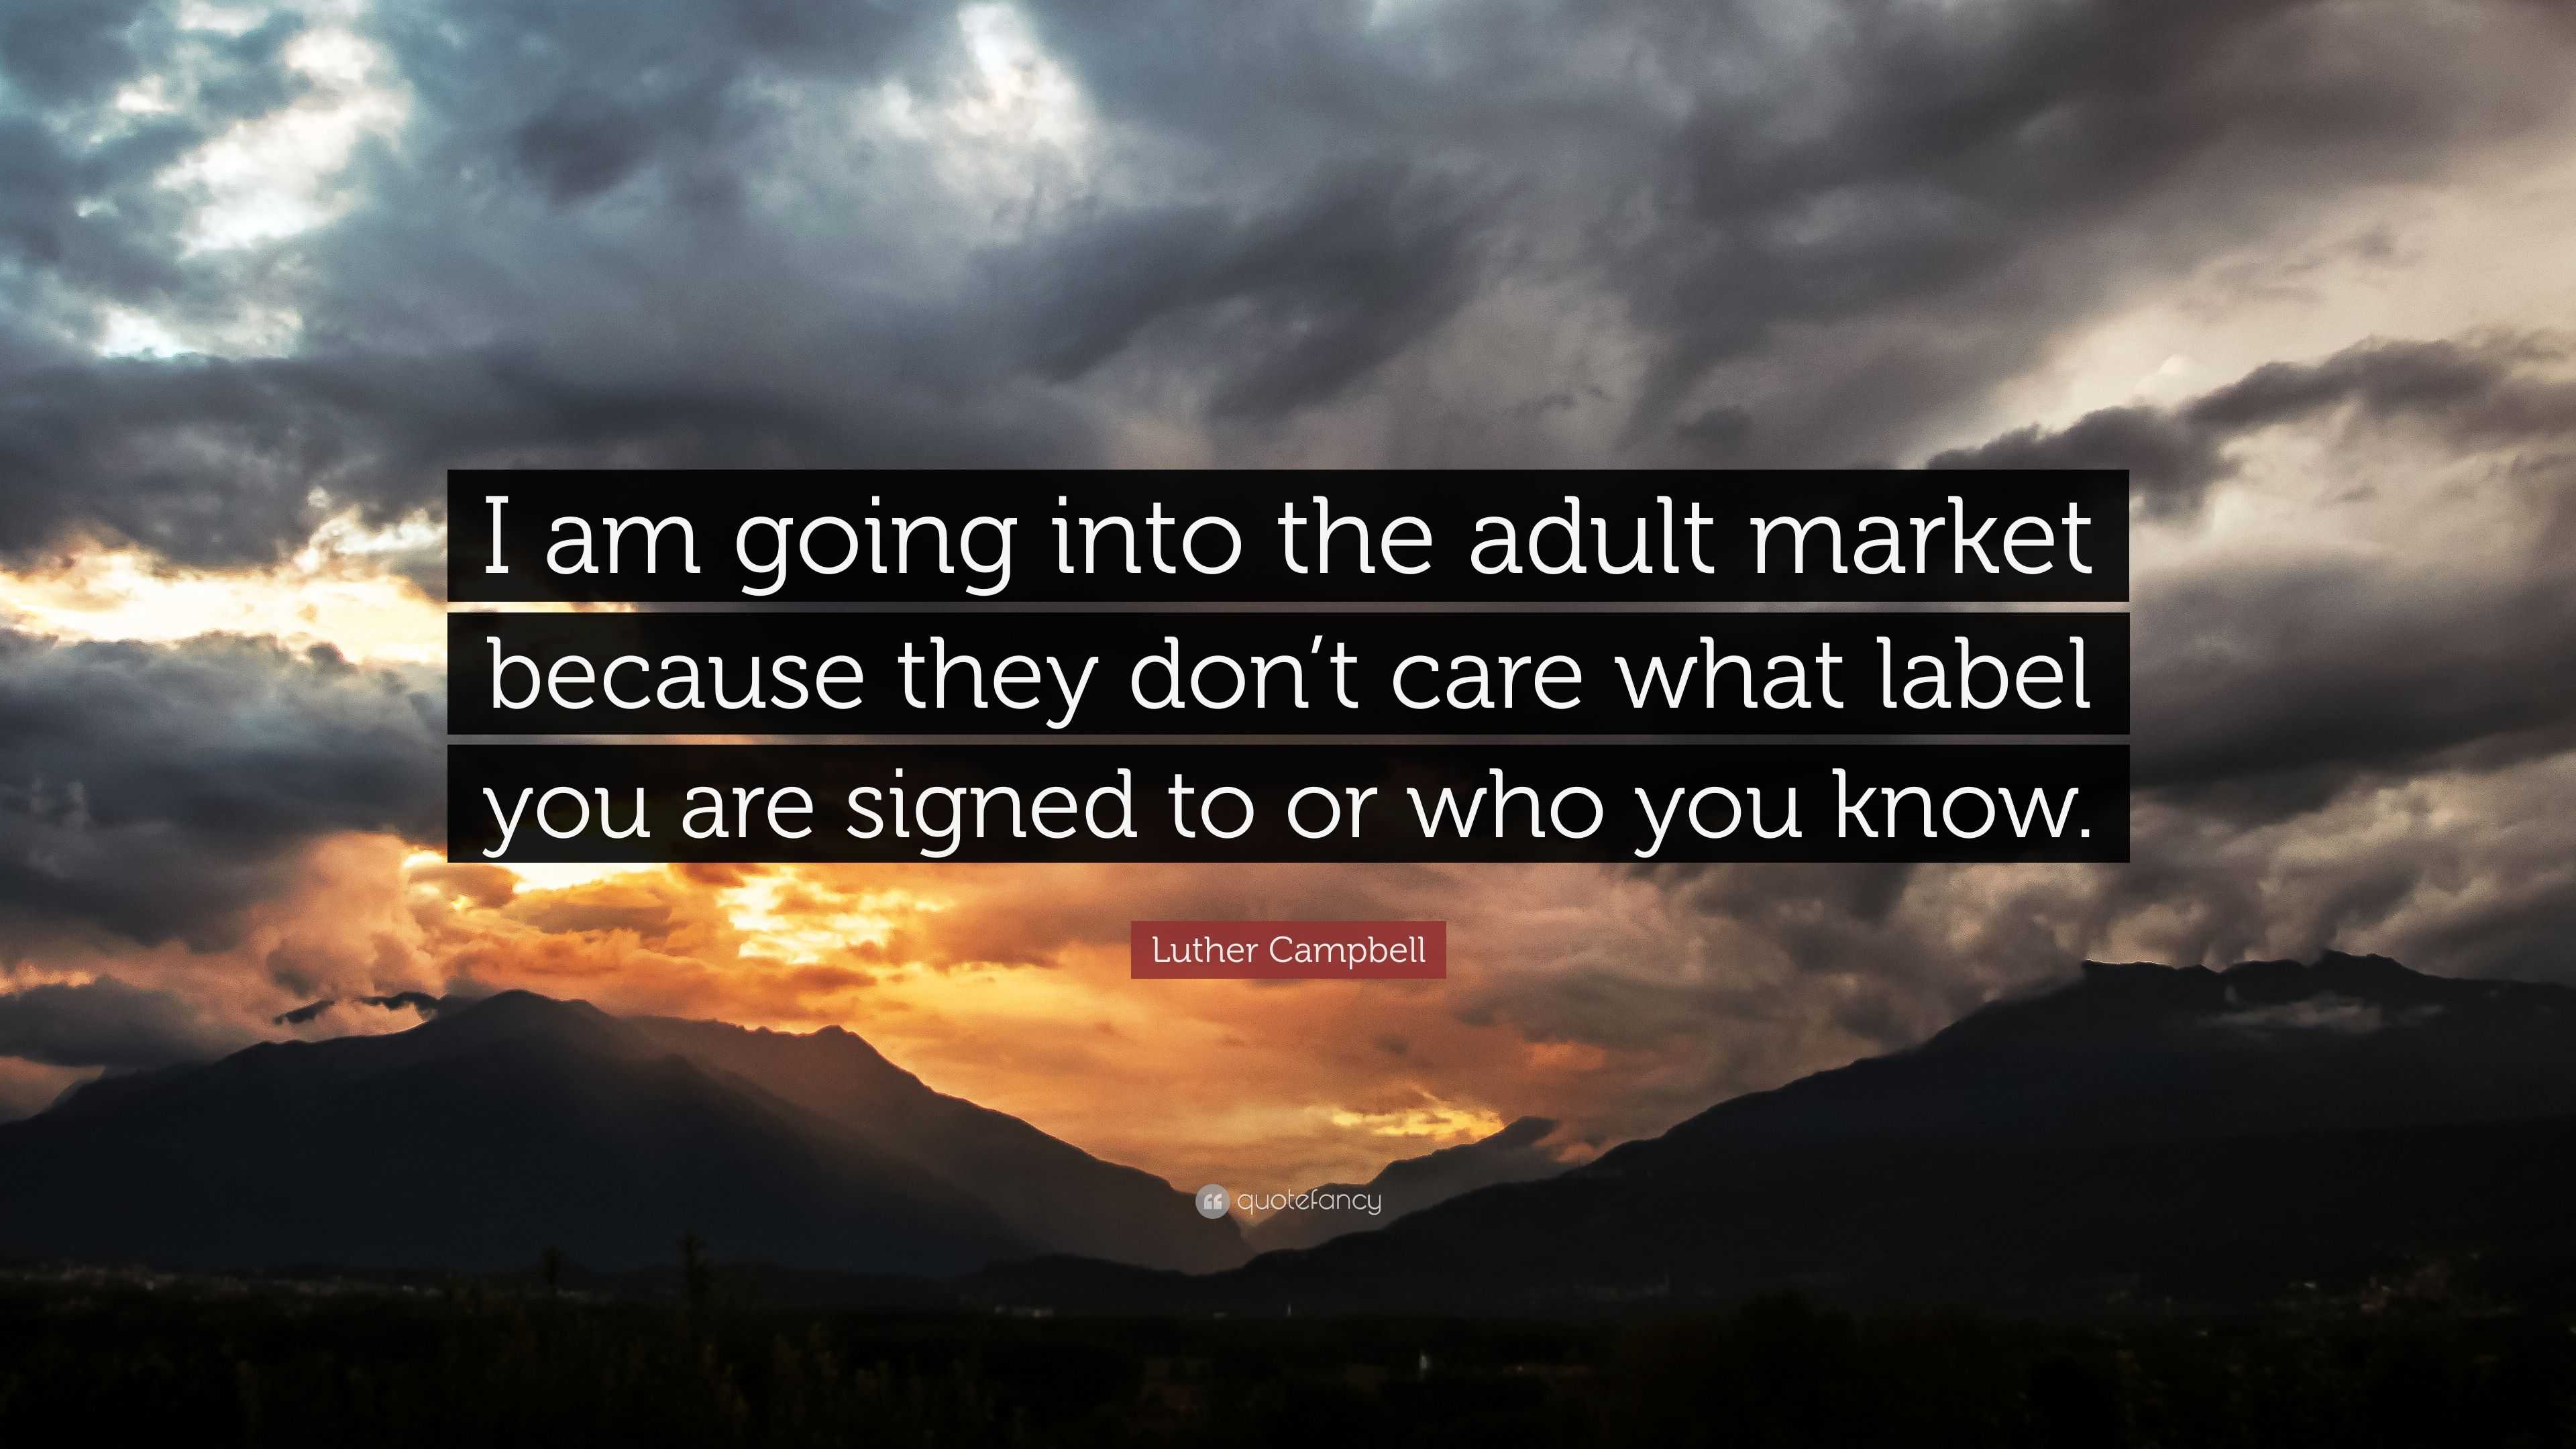 https://quotefancy.com/media/wallpaper/3840x2160/4517758-Luther-Campbell-Quote-I-am-going-into-the-adult-market-because.jpg